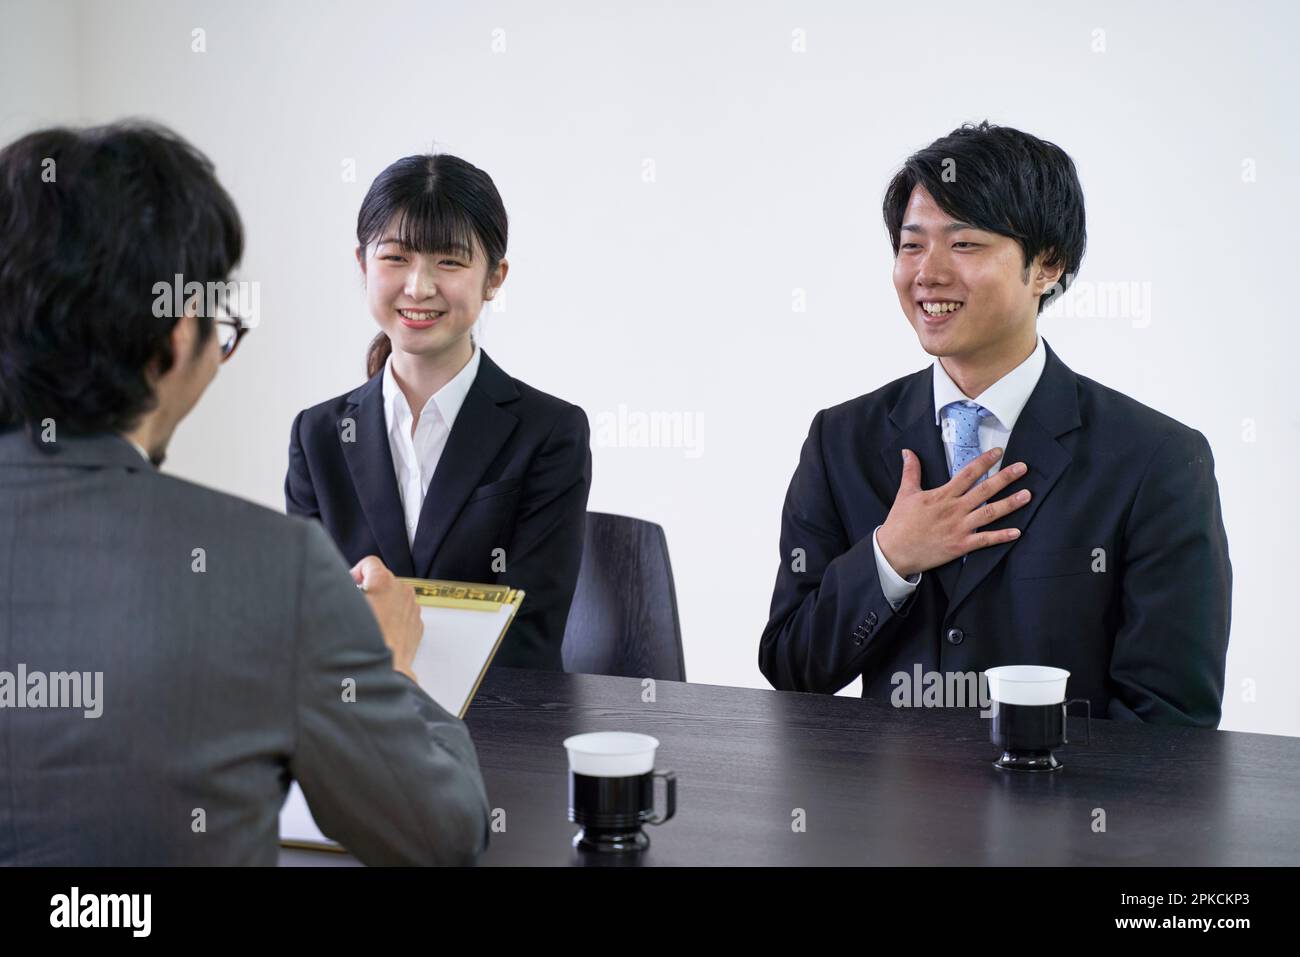 A male job hunter converses with his interviewer during a group interview. Stock Photo